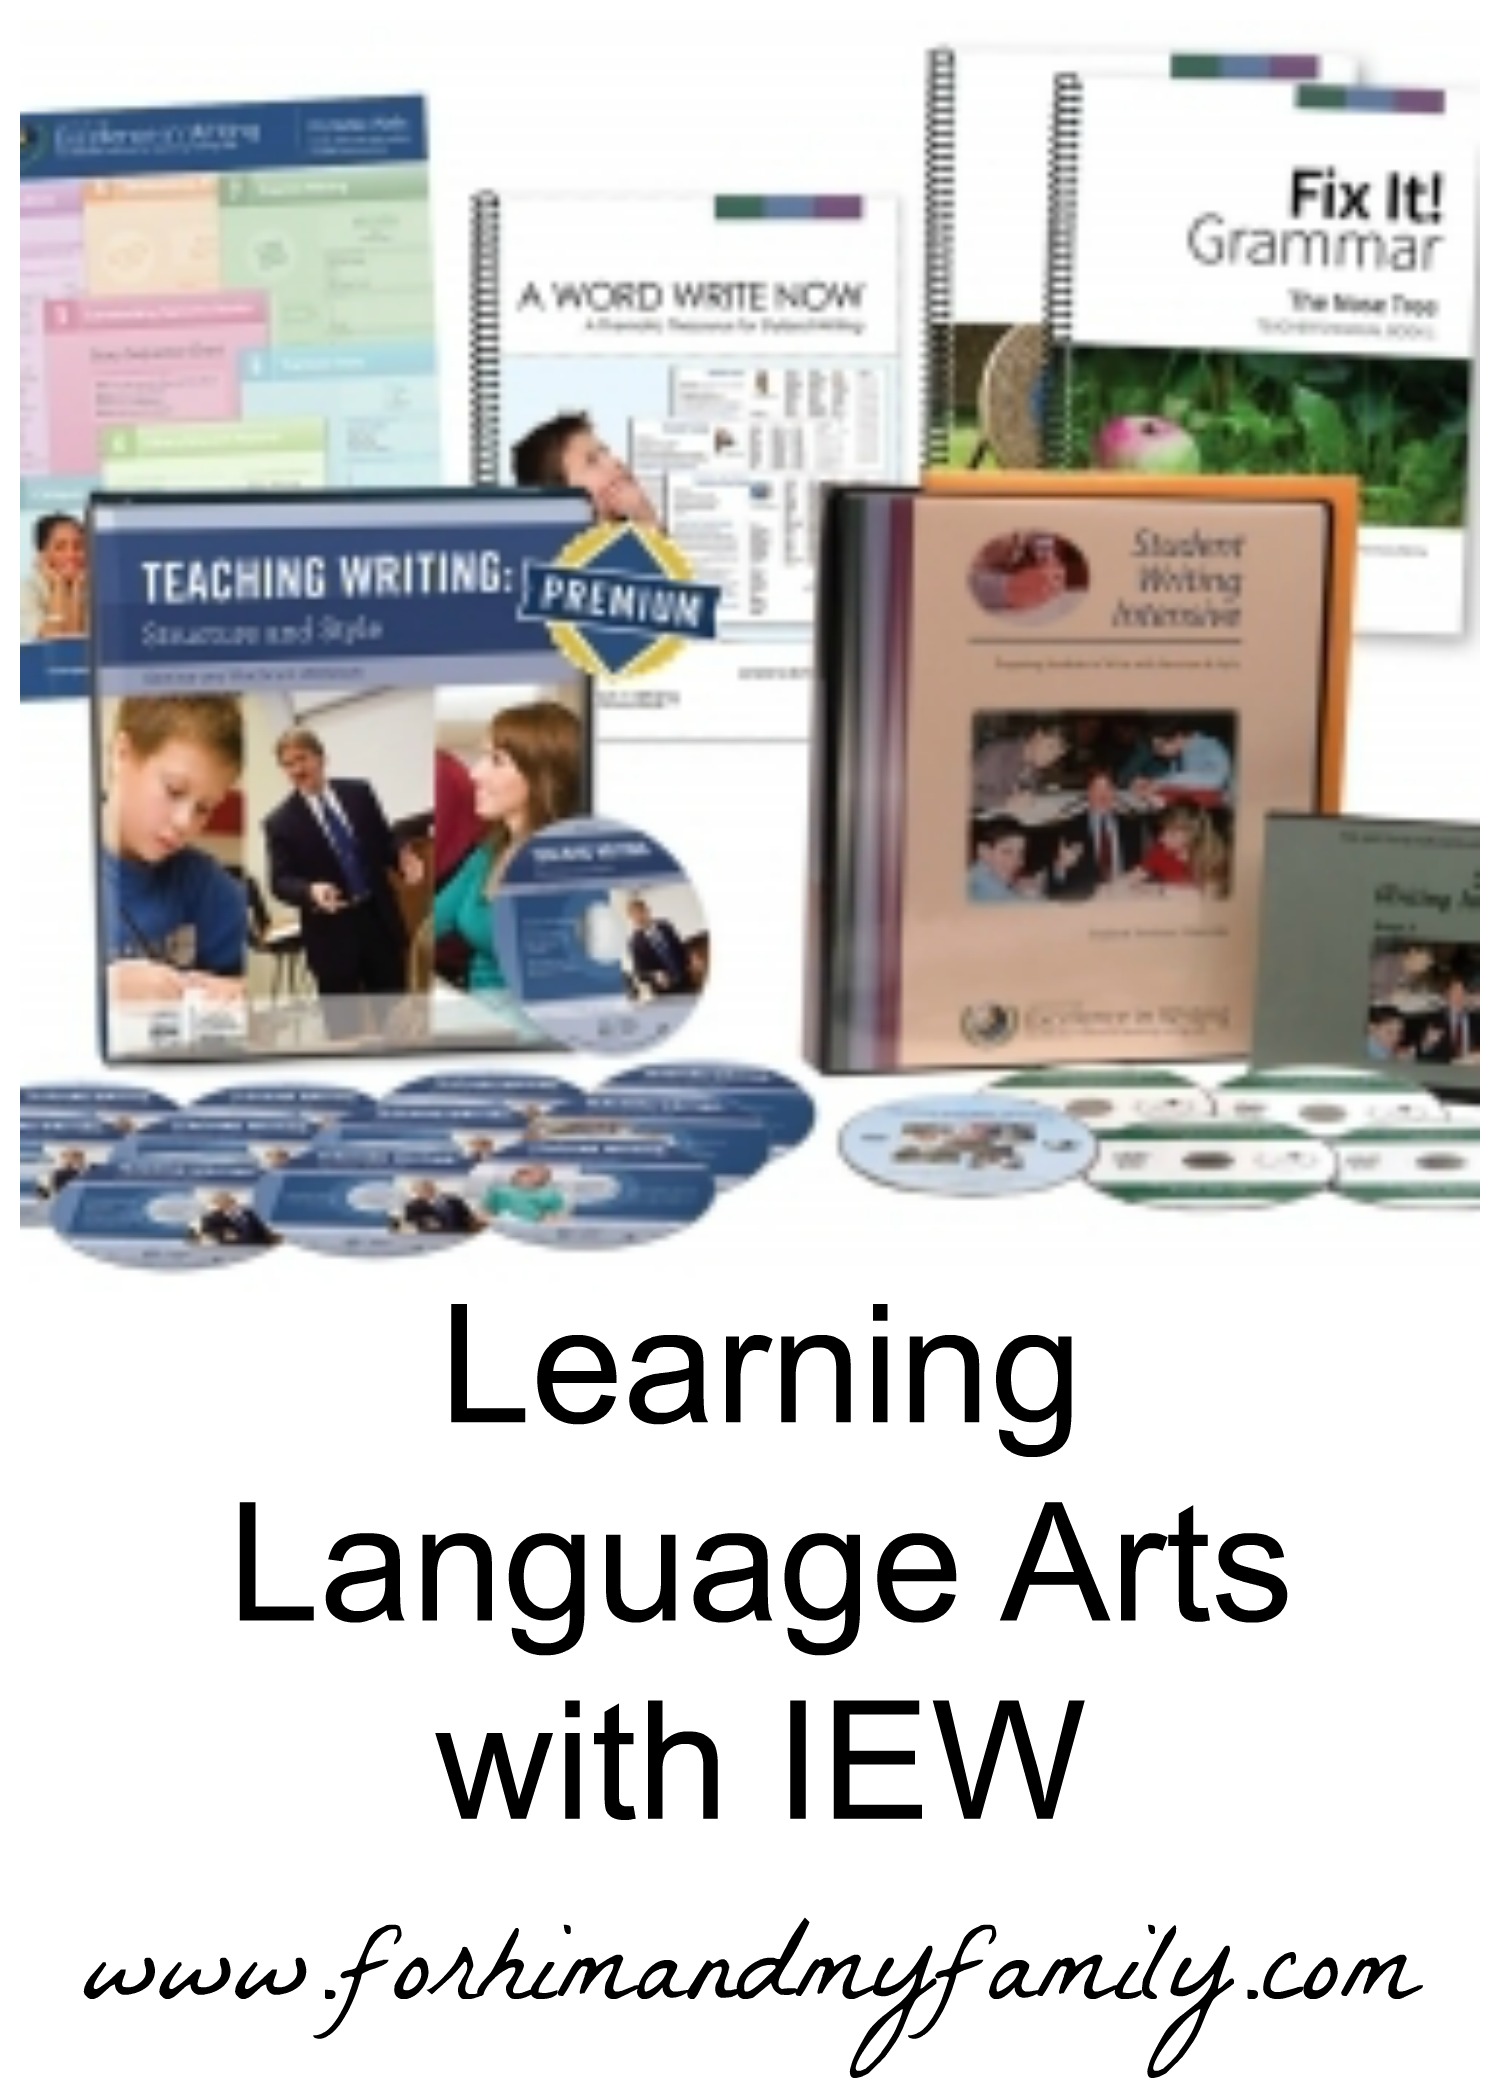 Learning Language Arts with IEW